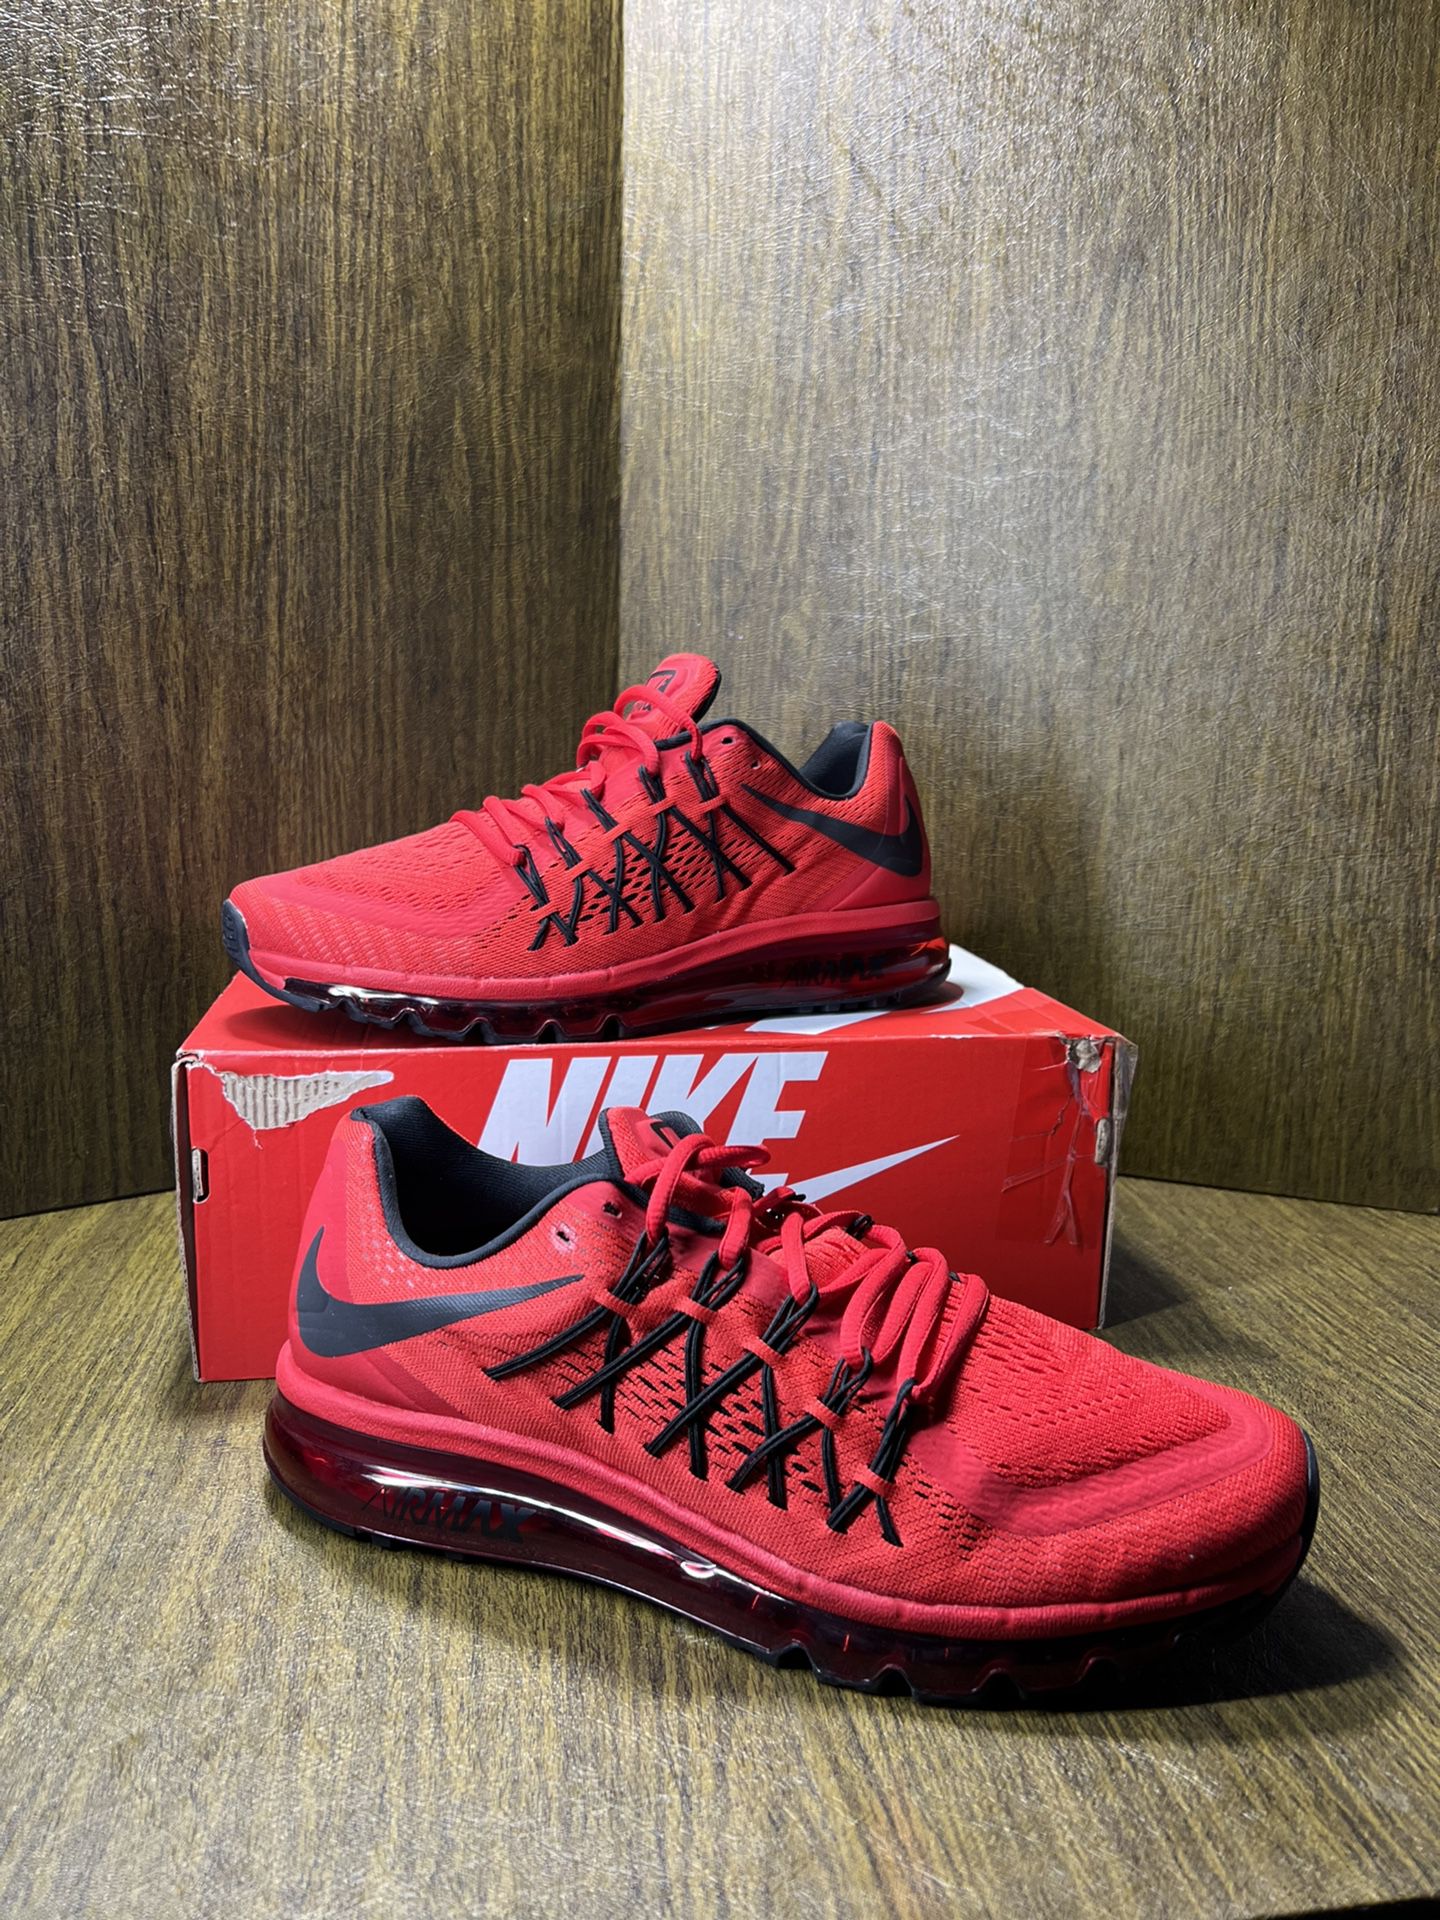 NIKE / Air Max 2015 / BLOOD RED / Running shoes kicks / SIZE: Men's 12 / DS New w/ Box!! / Red & Black for Sale in Kent, WA -